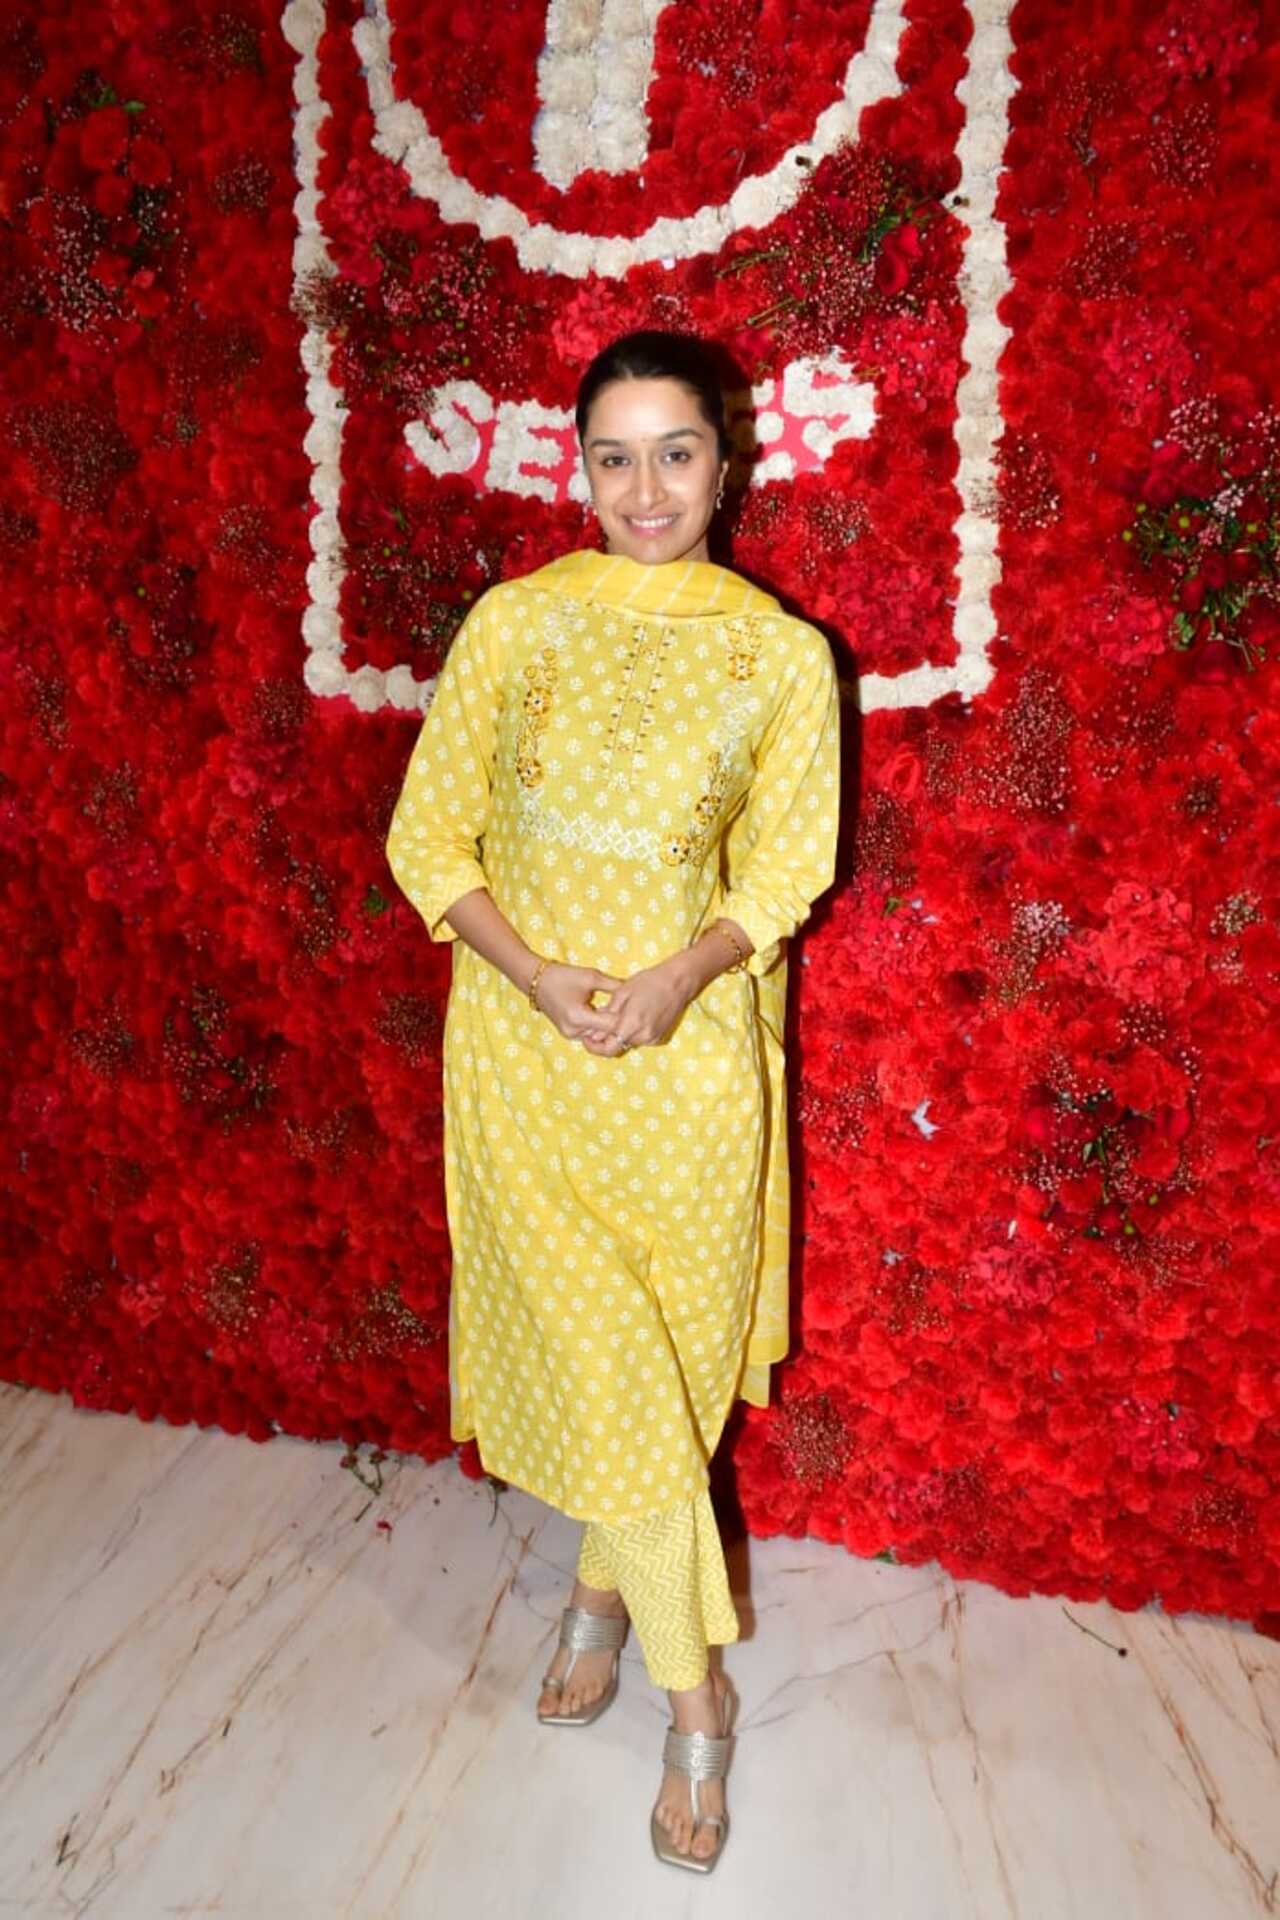 Shraddha Kapoor looked lovely in a pastel yellow outfit